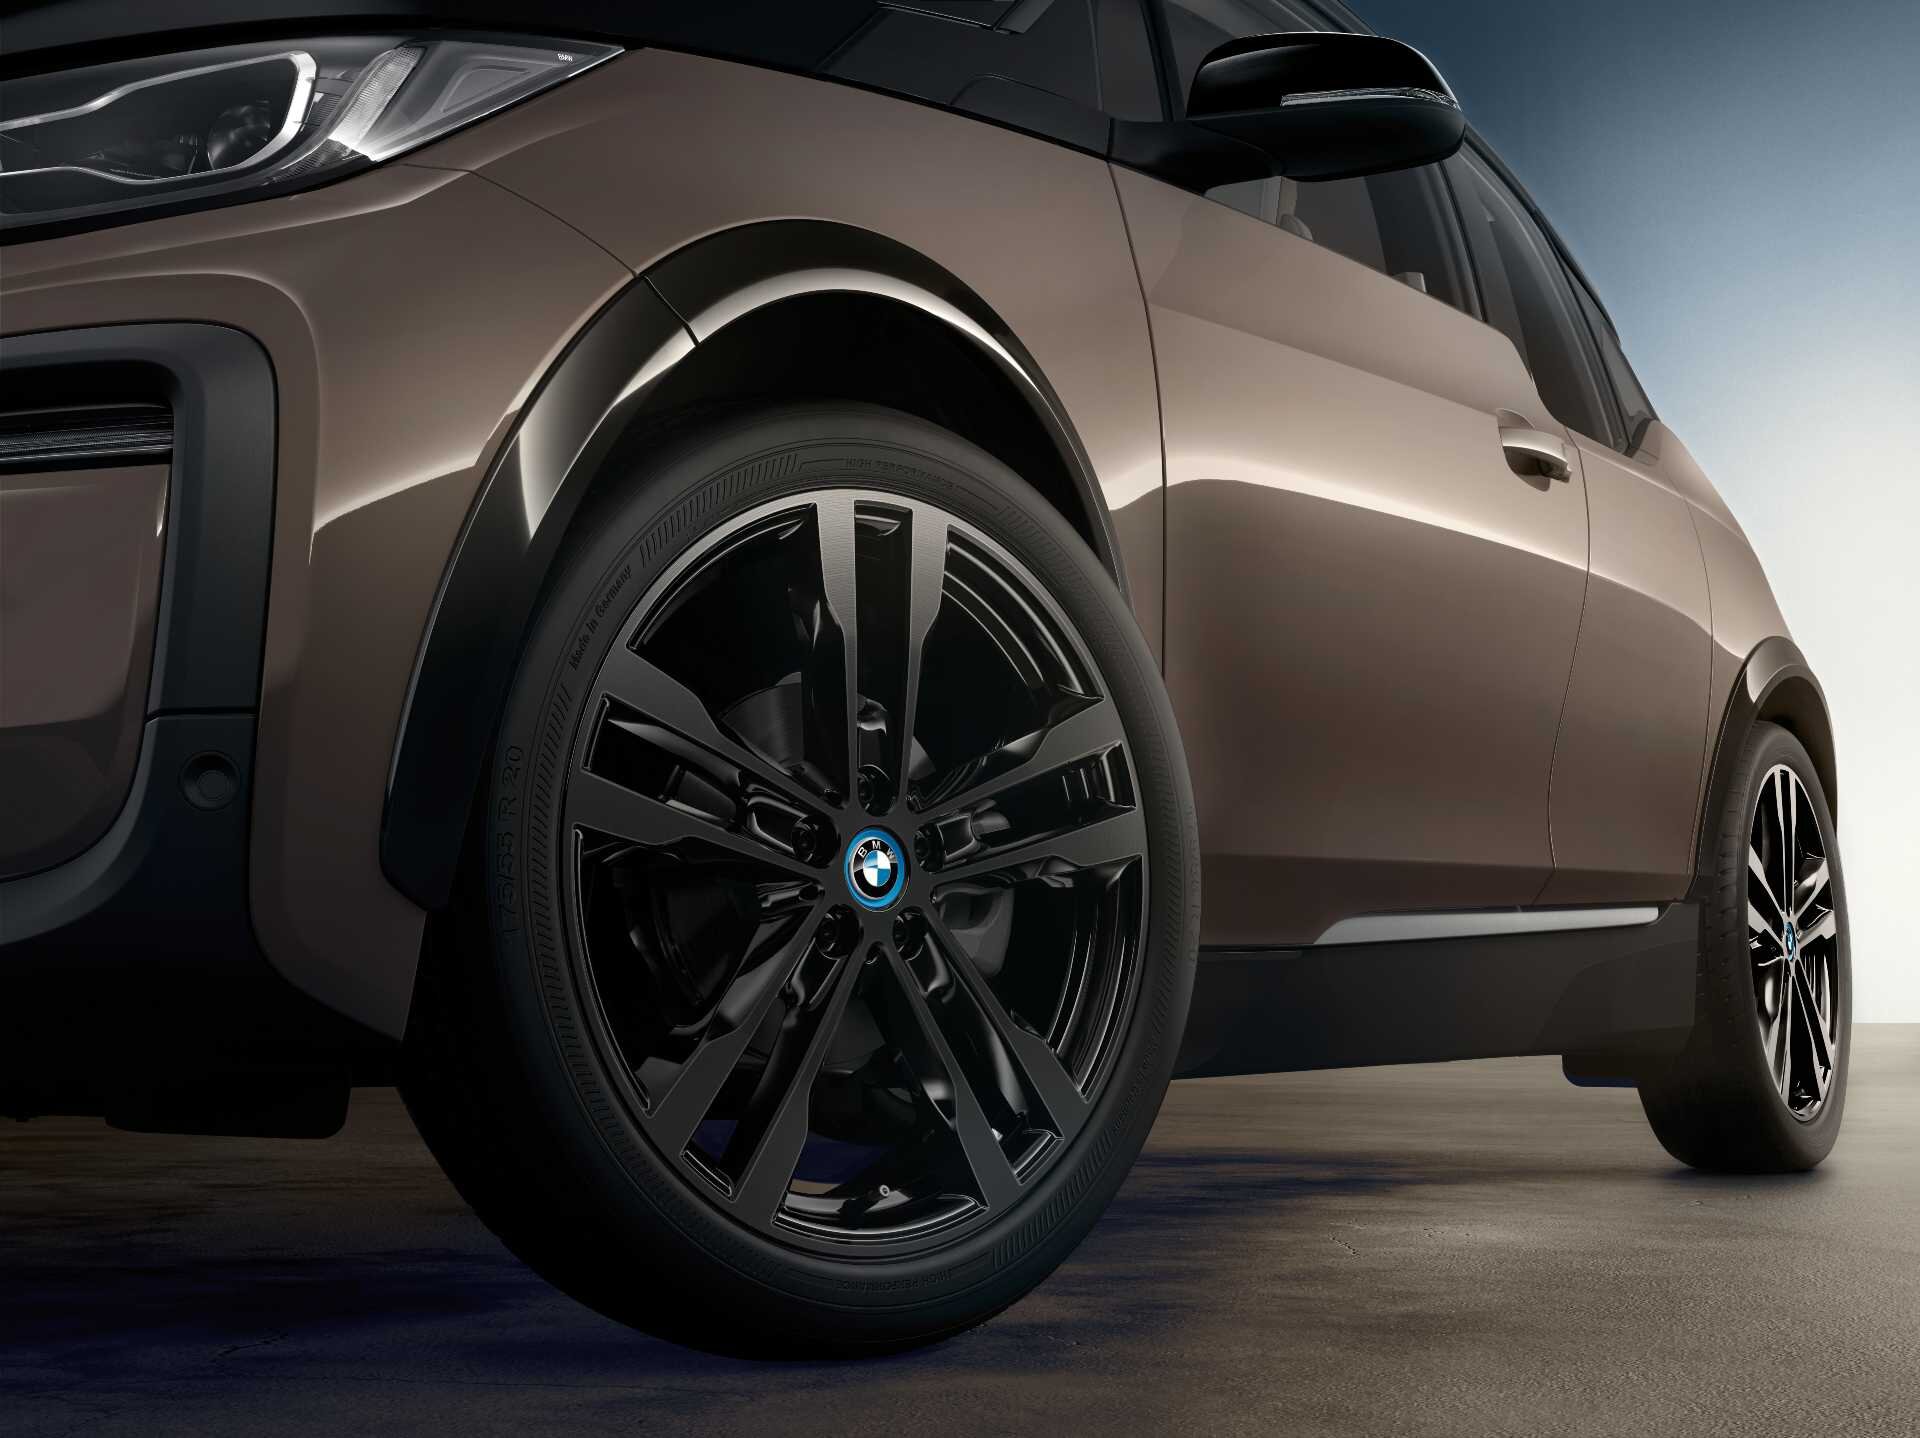 BMW i3 Tyres - For example, the BMW i3 has very tall and narrow tyres to improve aerodynamic performance and reduce the rolling resistance of the tyre on the tarmac surface - all of which helps improve battery range. There is added functionality in the tall profile - the strength of such a construction helps support the weight of the battery. As you might have guessed by now, the tyre has been designed uniquely for the car.